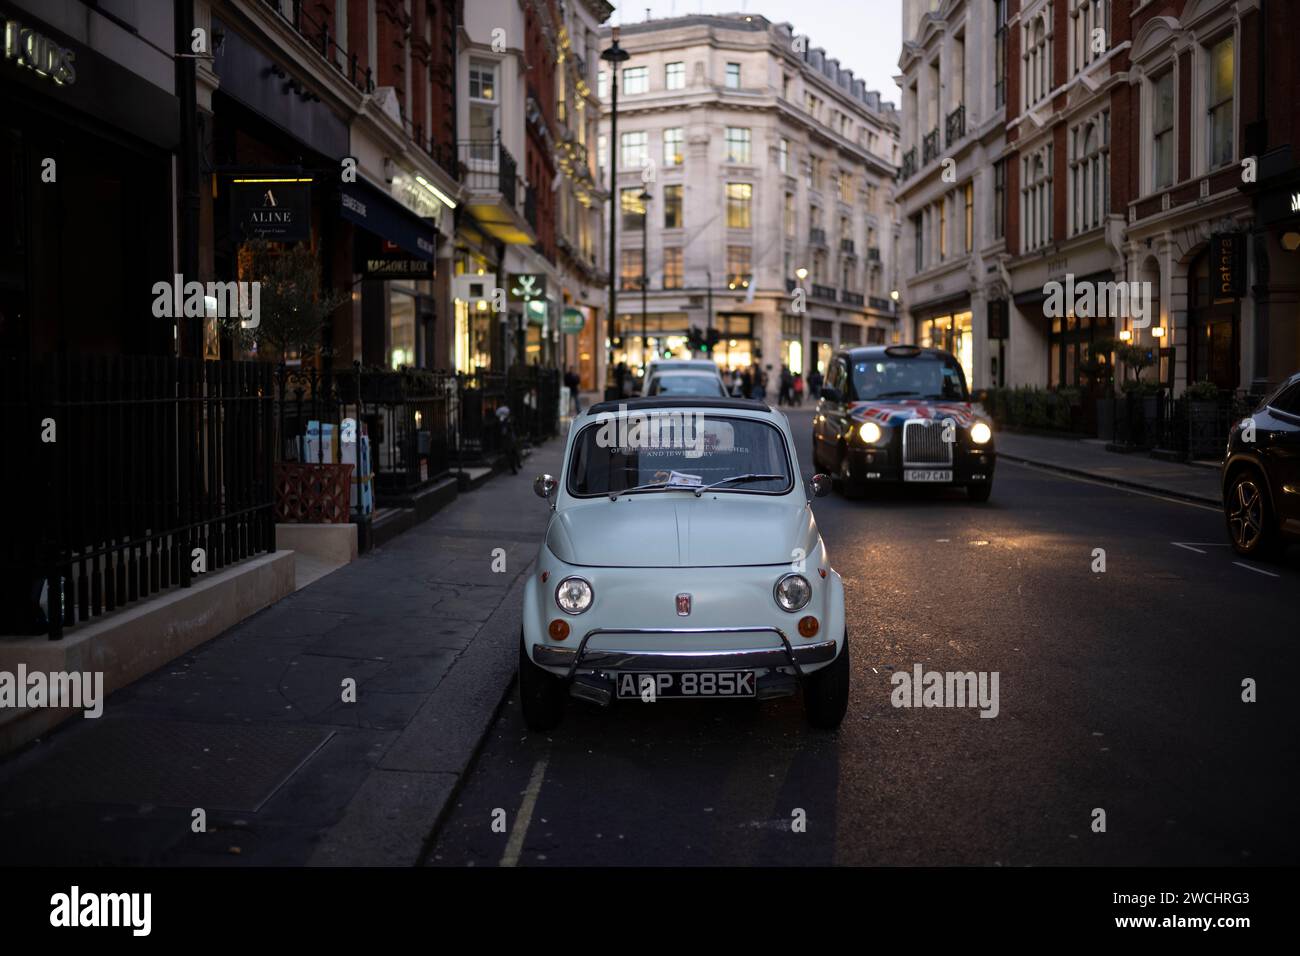 A Fiat 500 classic car is parked on Maddox Street in Mayfair looking towards Regent Street,  London, England, United Kingdom Stock Photo